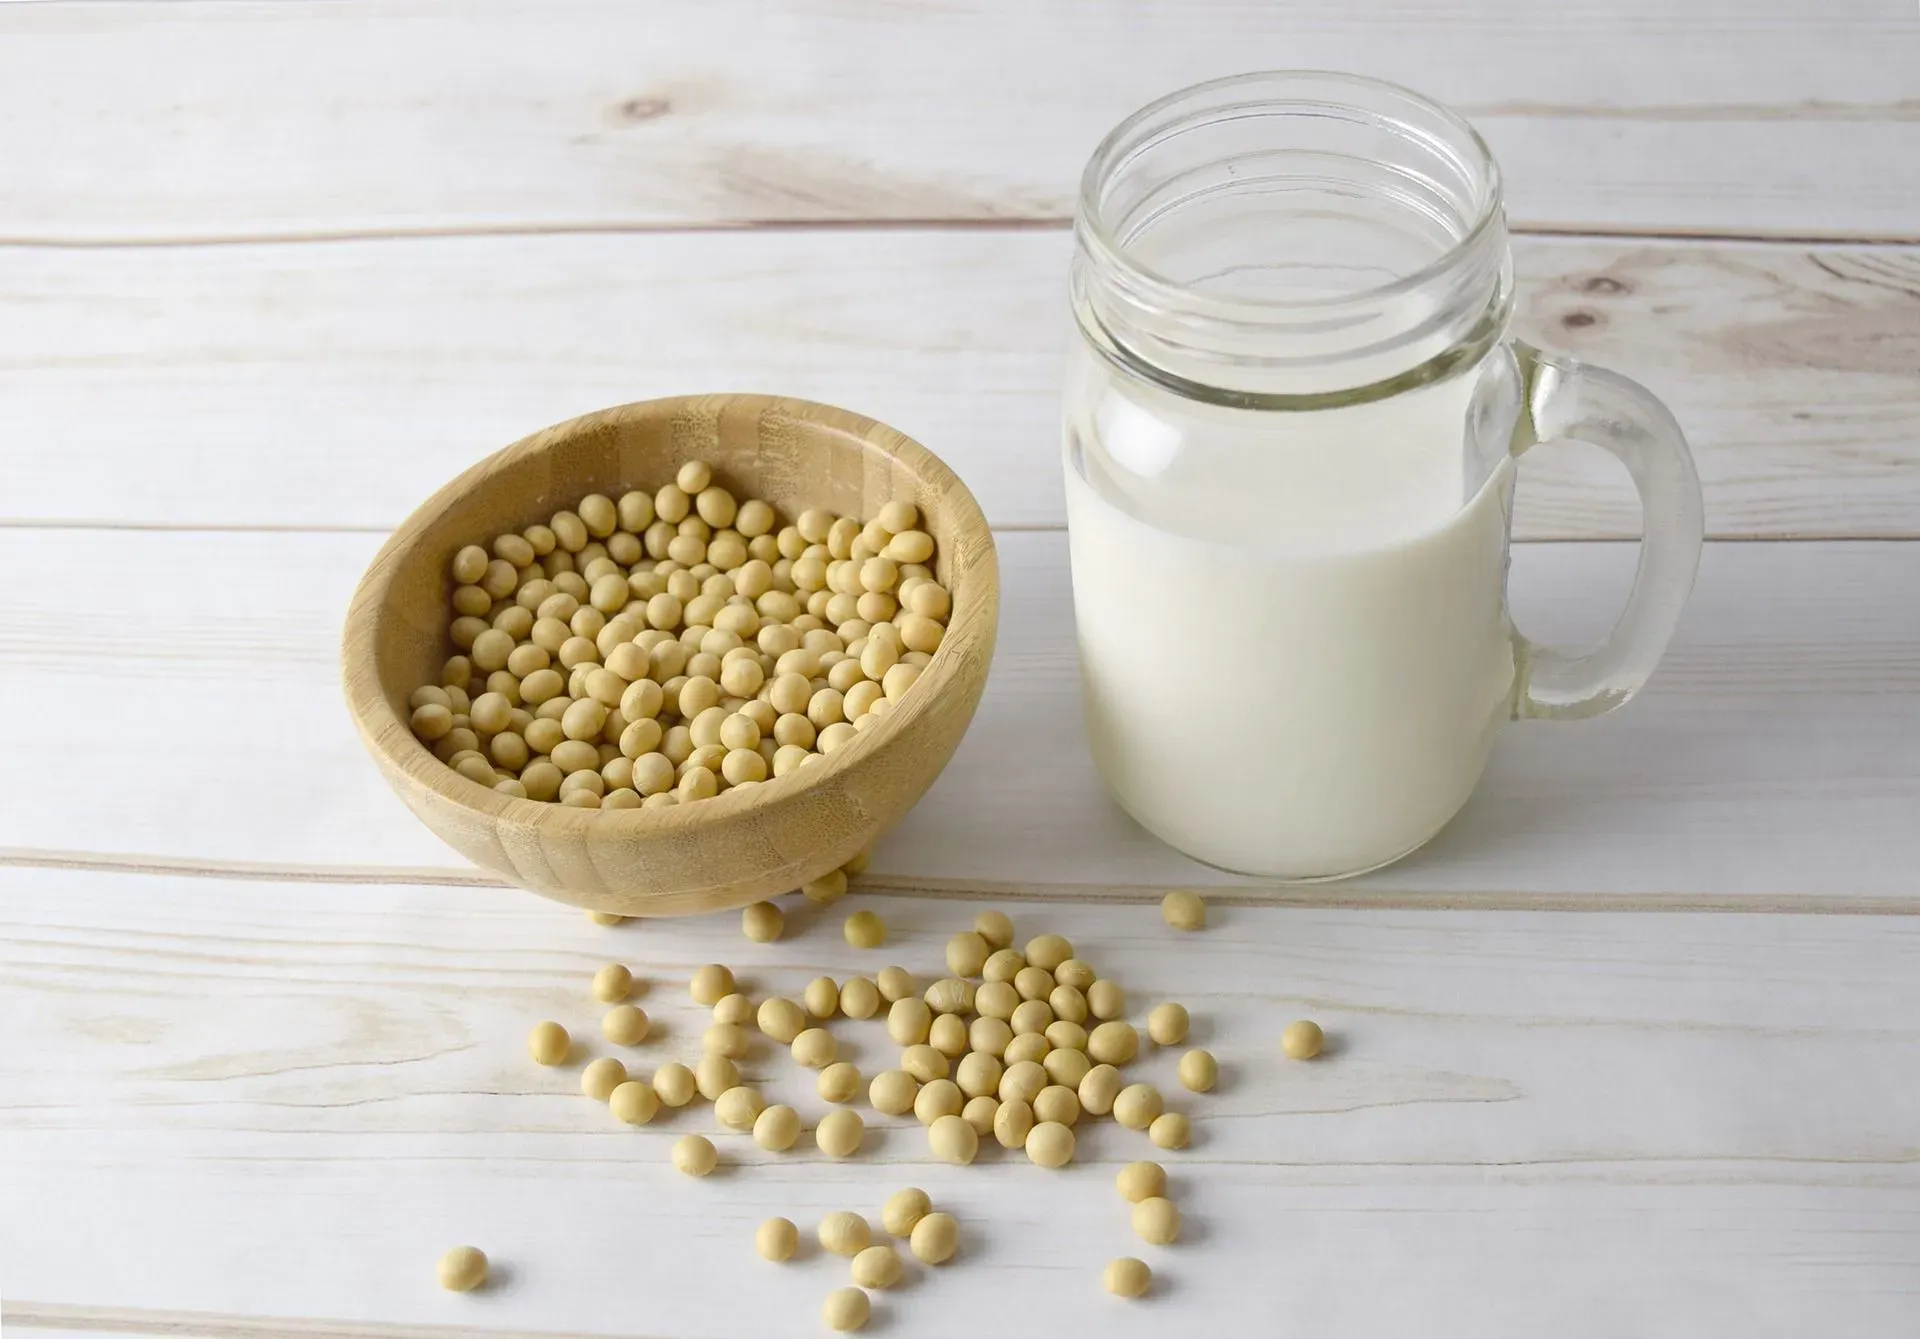 Almond milk is the most popular form of plant-based milk.